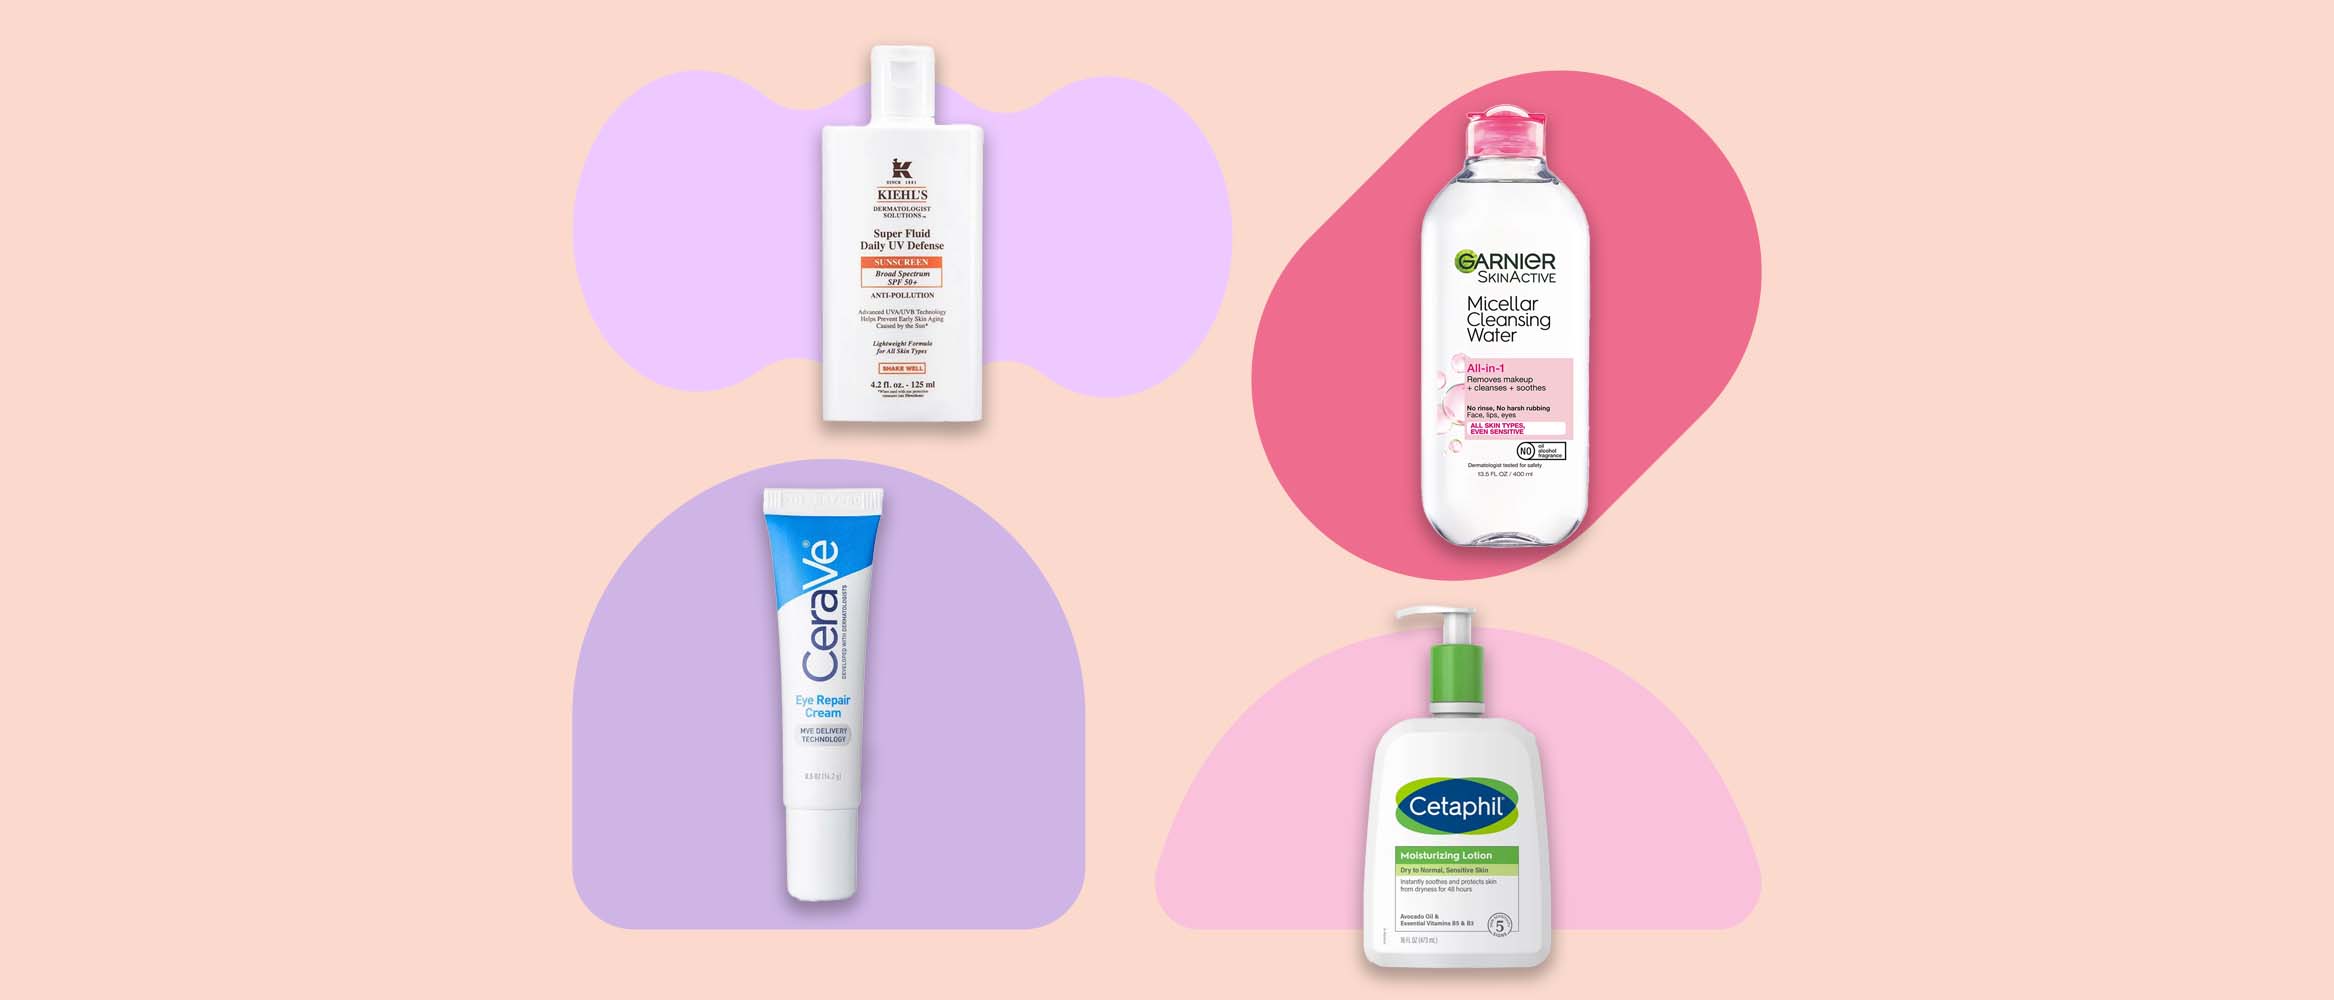 four skincare products from Kiehl's, Garnier, CeraVe and Cetaphil